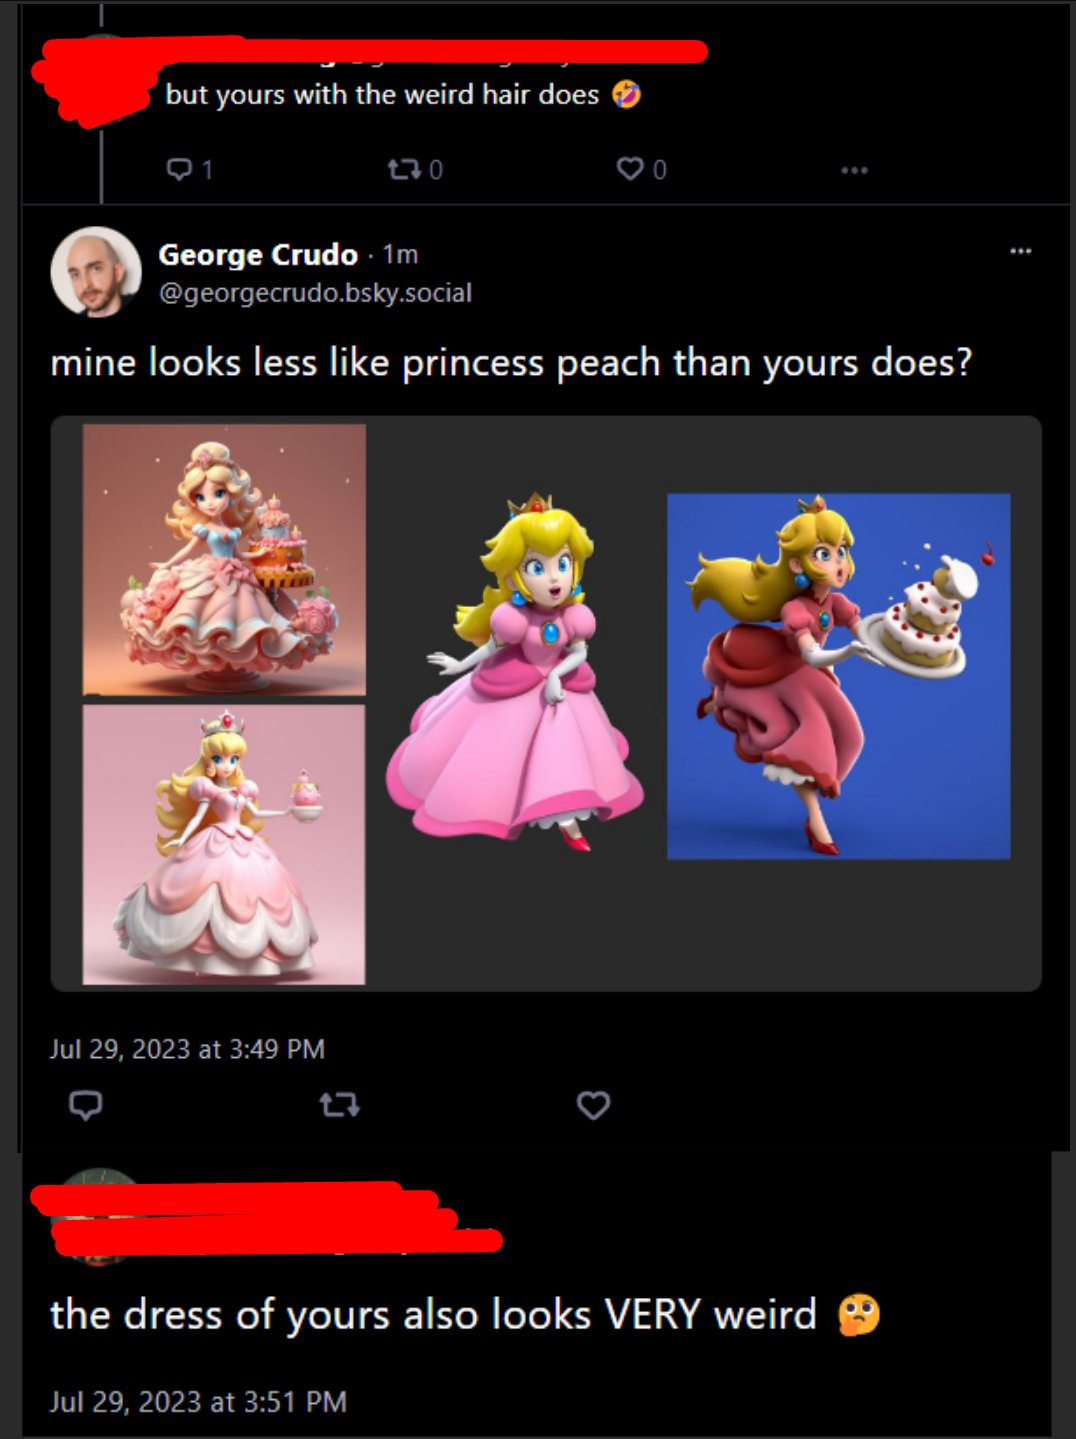 george crudo comparing two pink princesses with his model of peach and asking which one looks more like princess peach (it's his one)